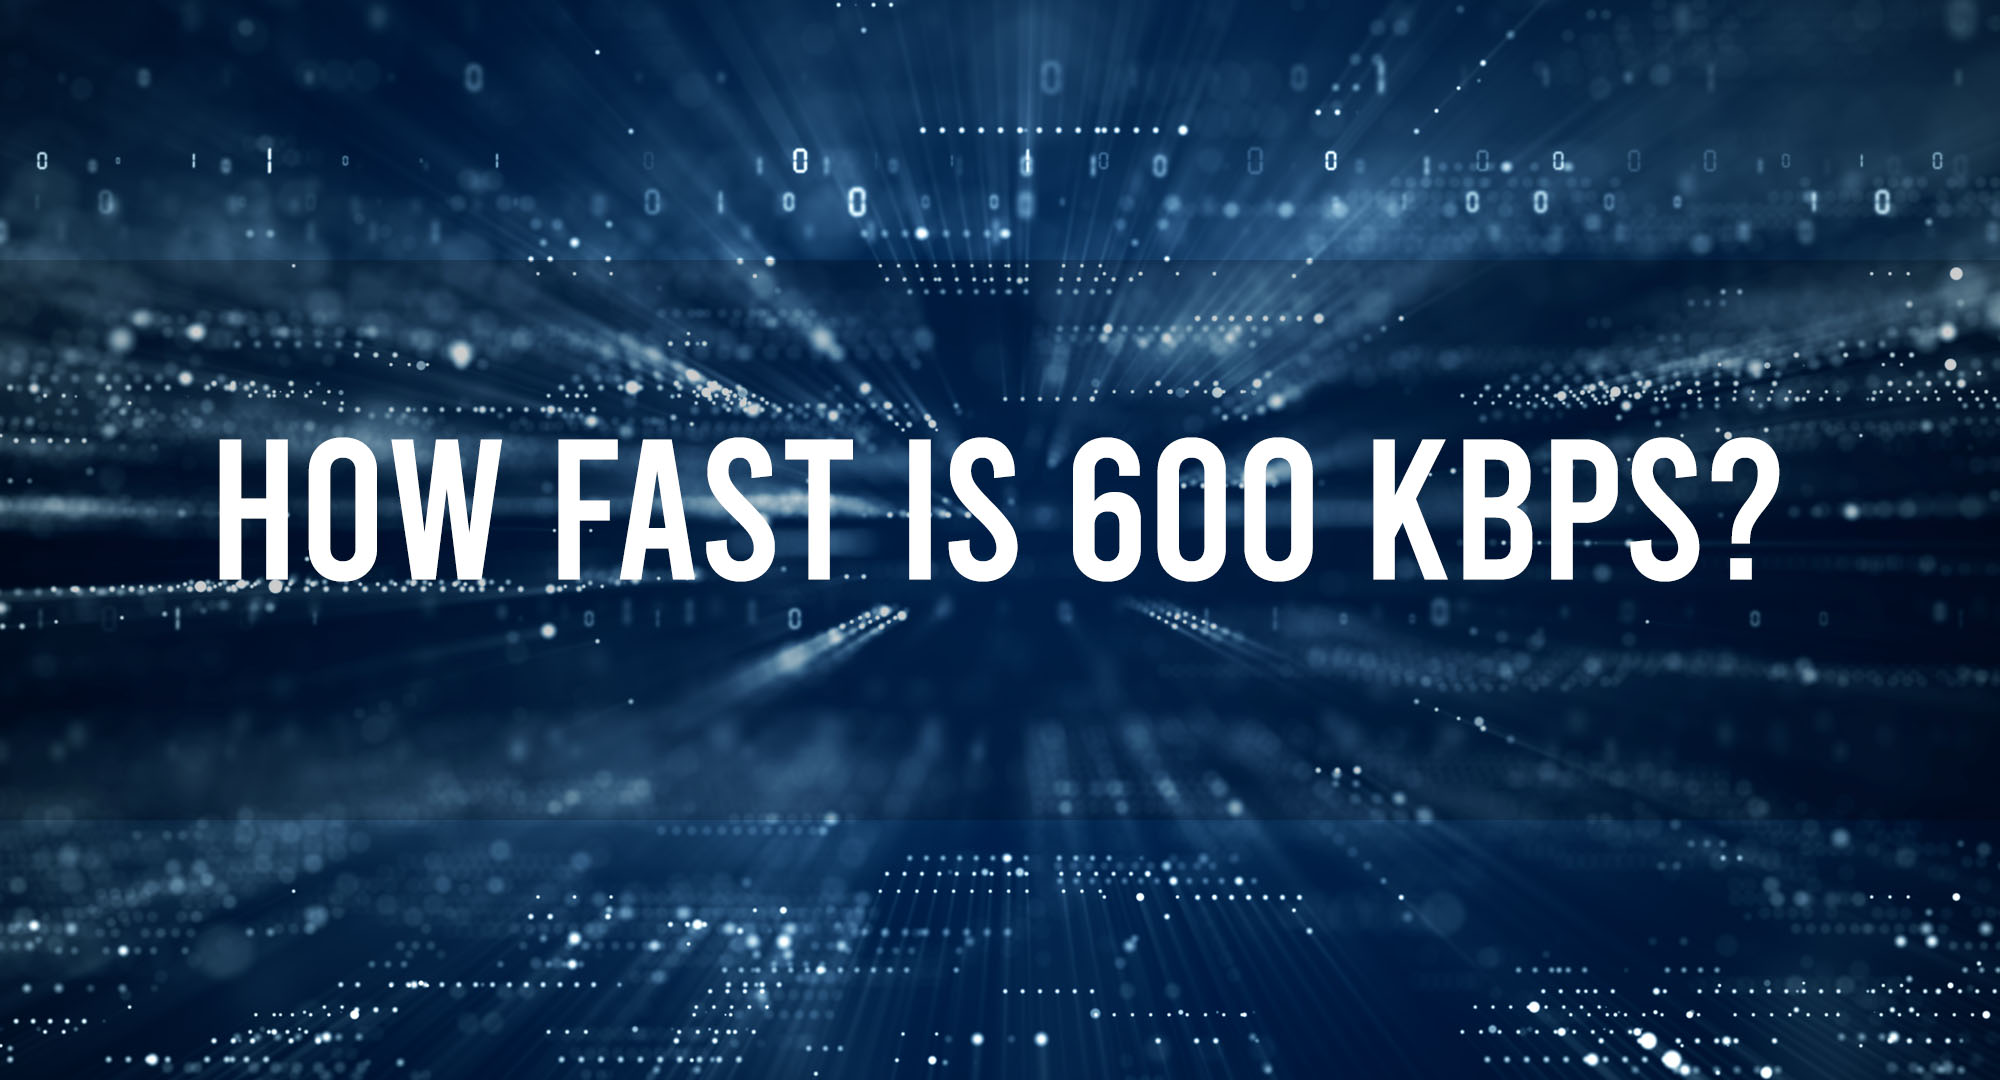 How fast is 600 kbps